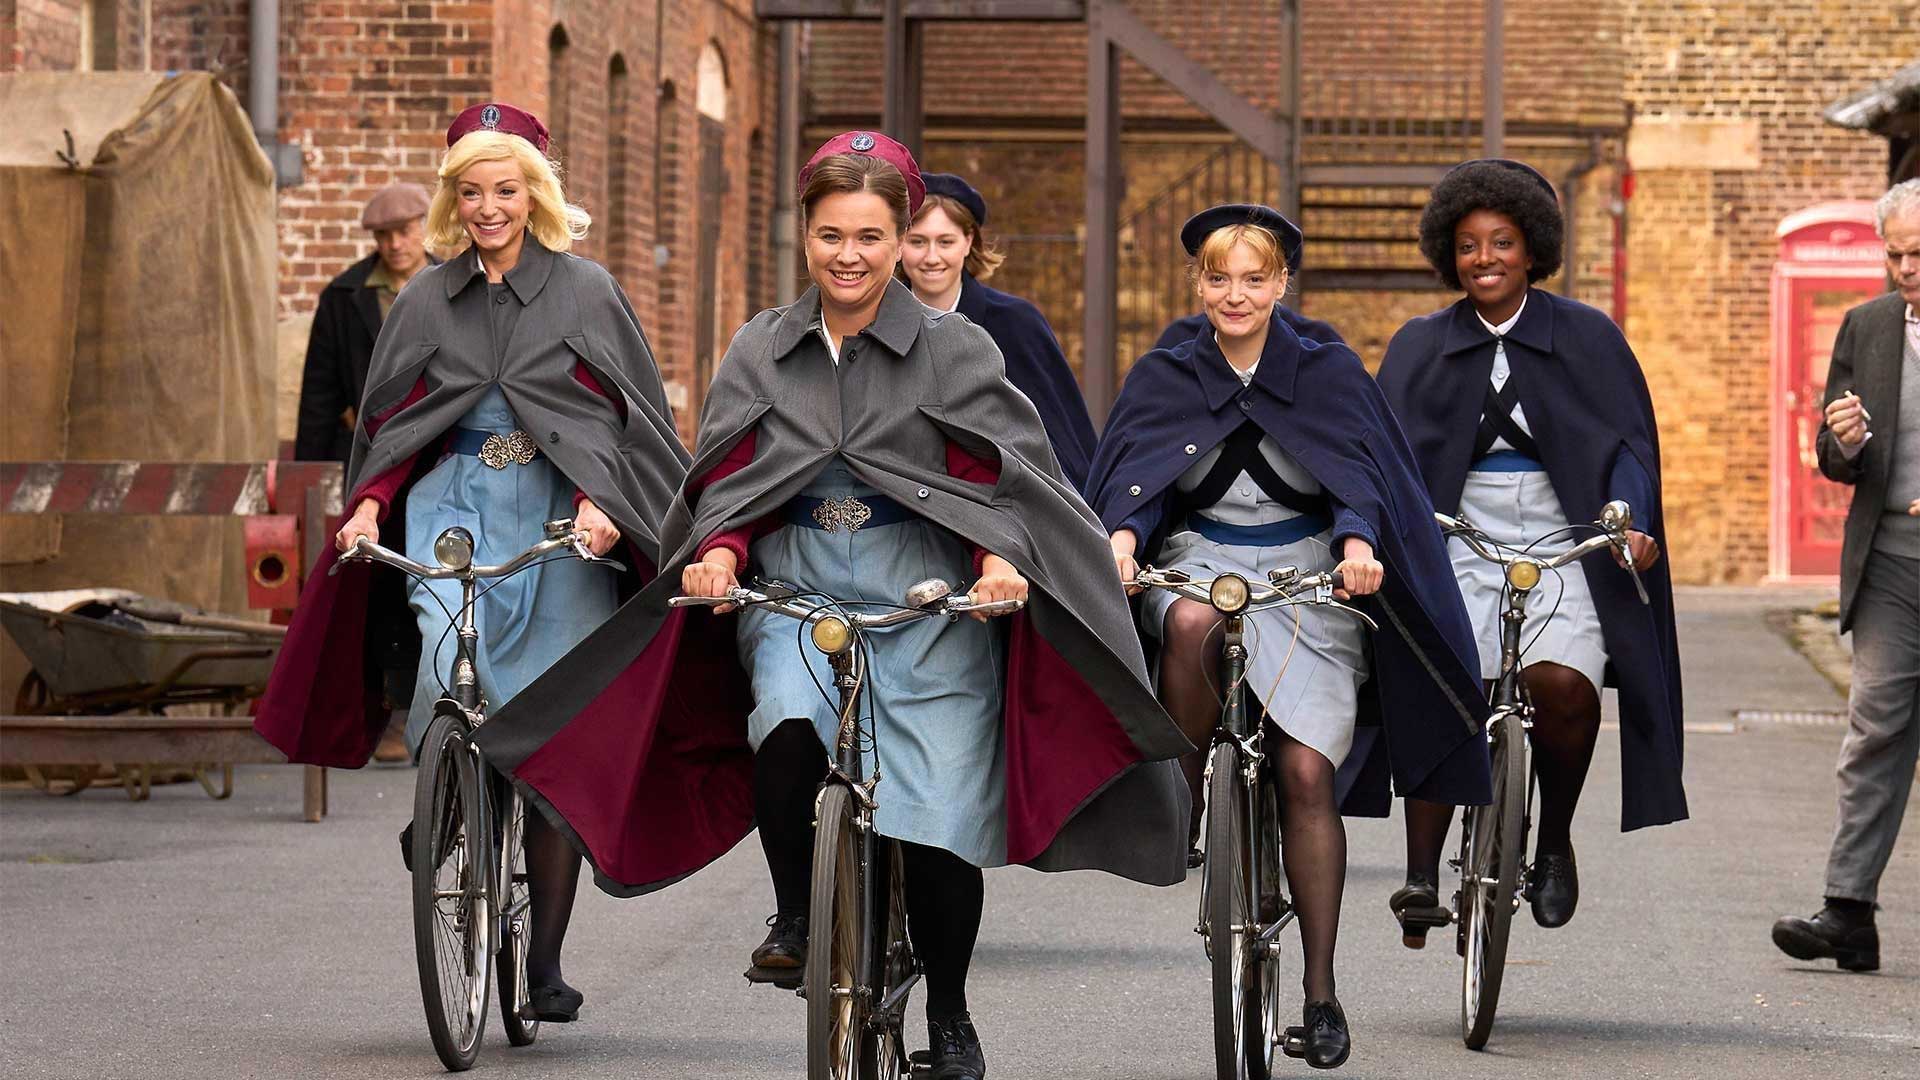 Call the Midwife returns for a 13th season on Sunday, March 17 on PBS 6.